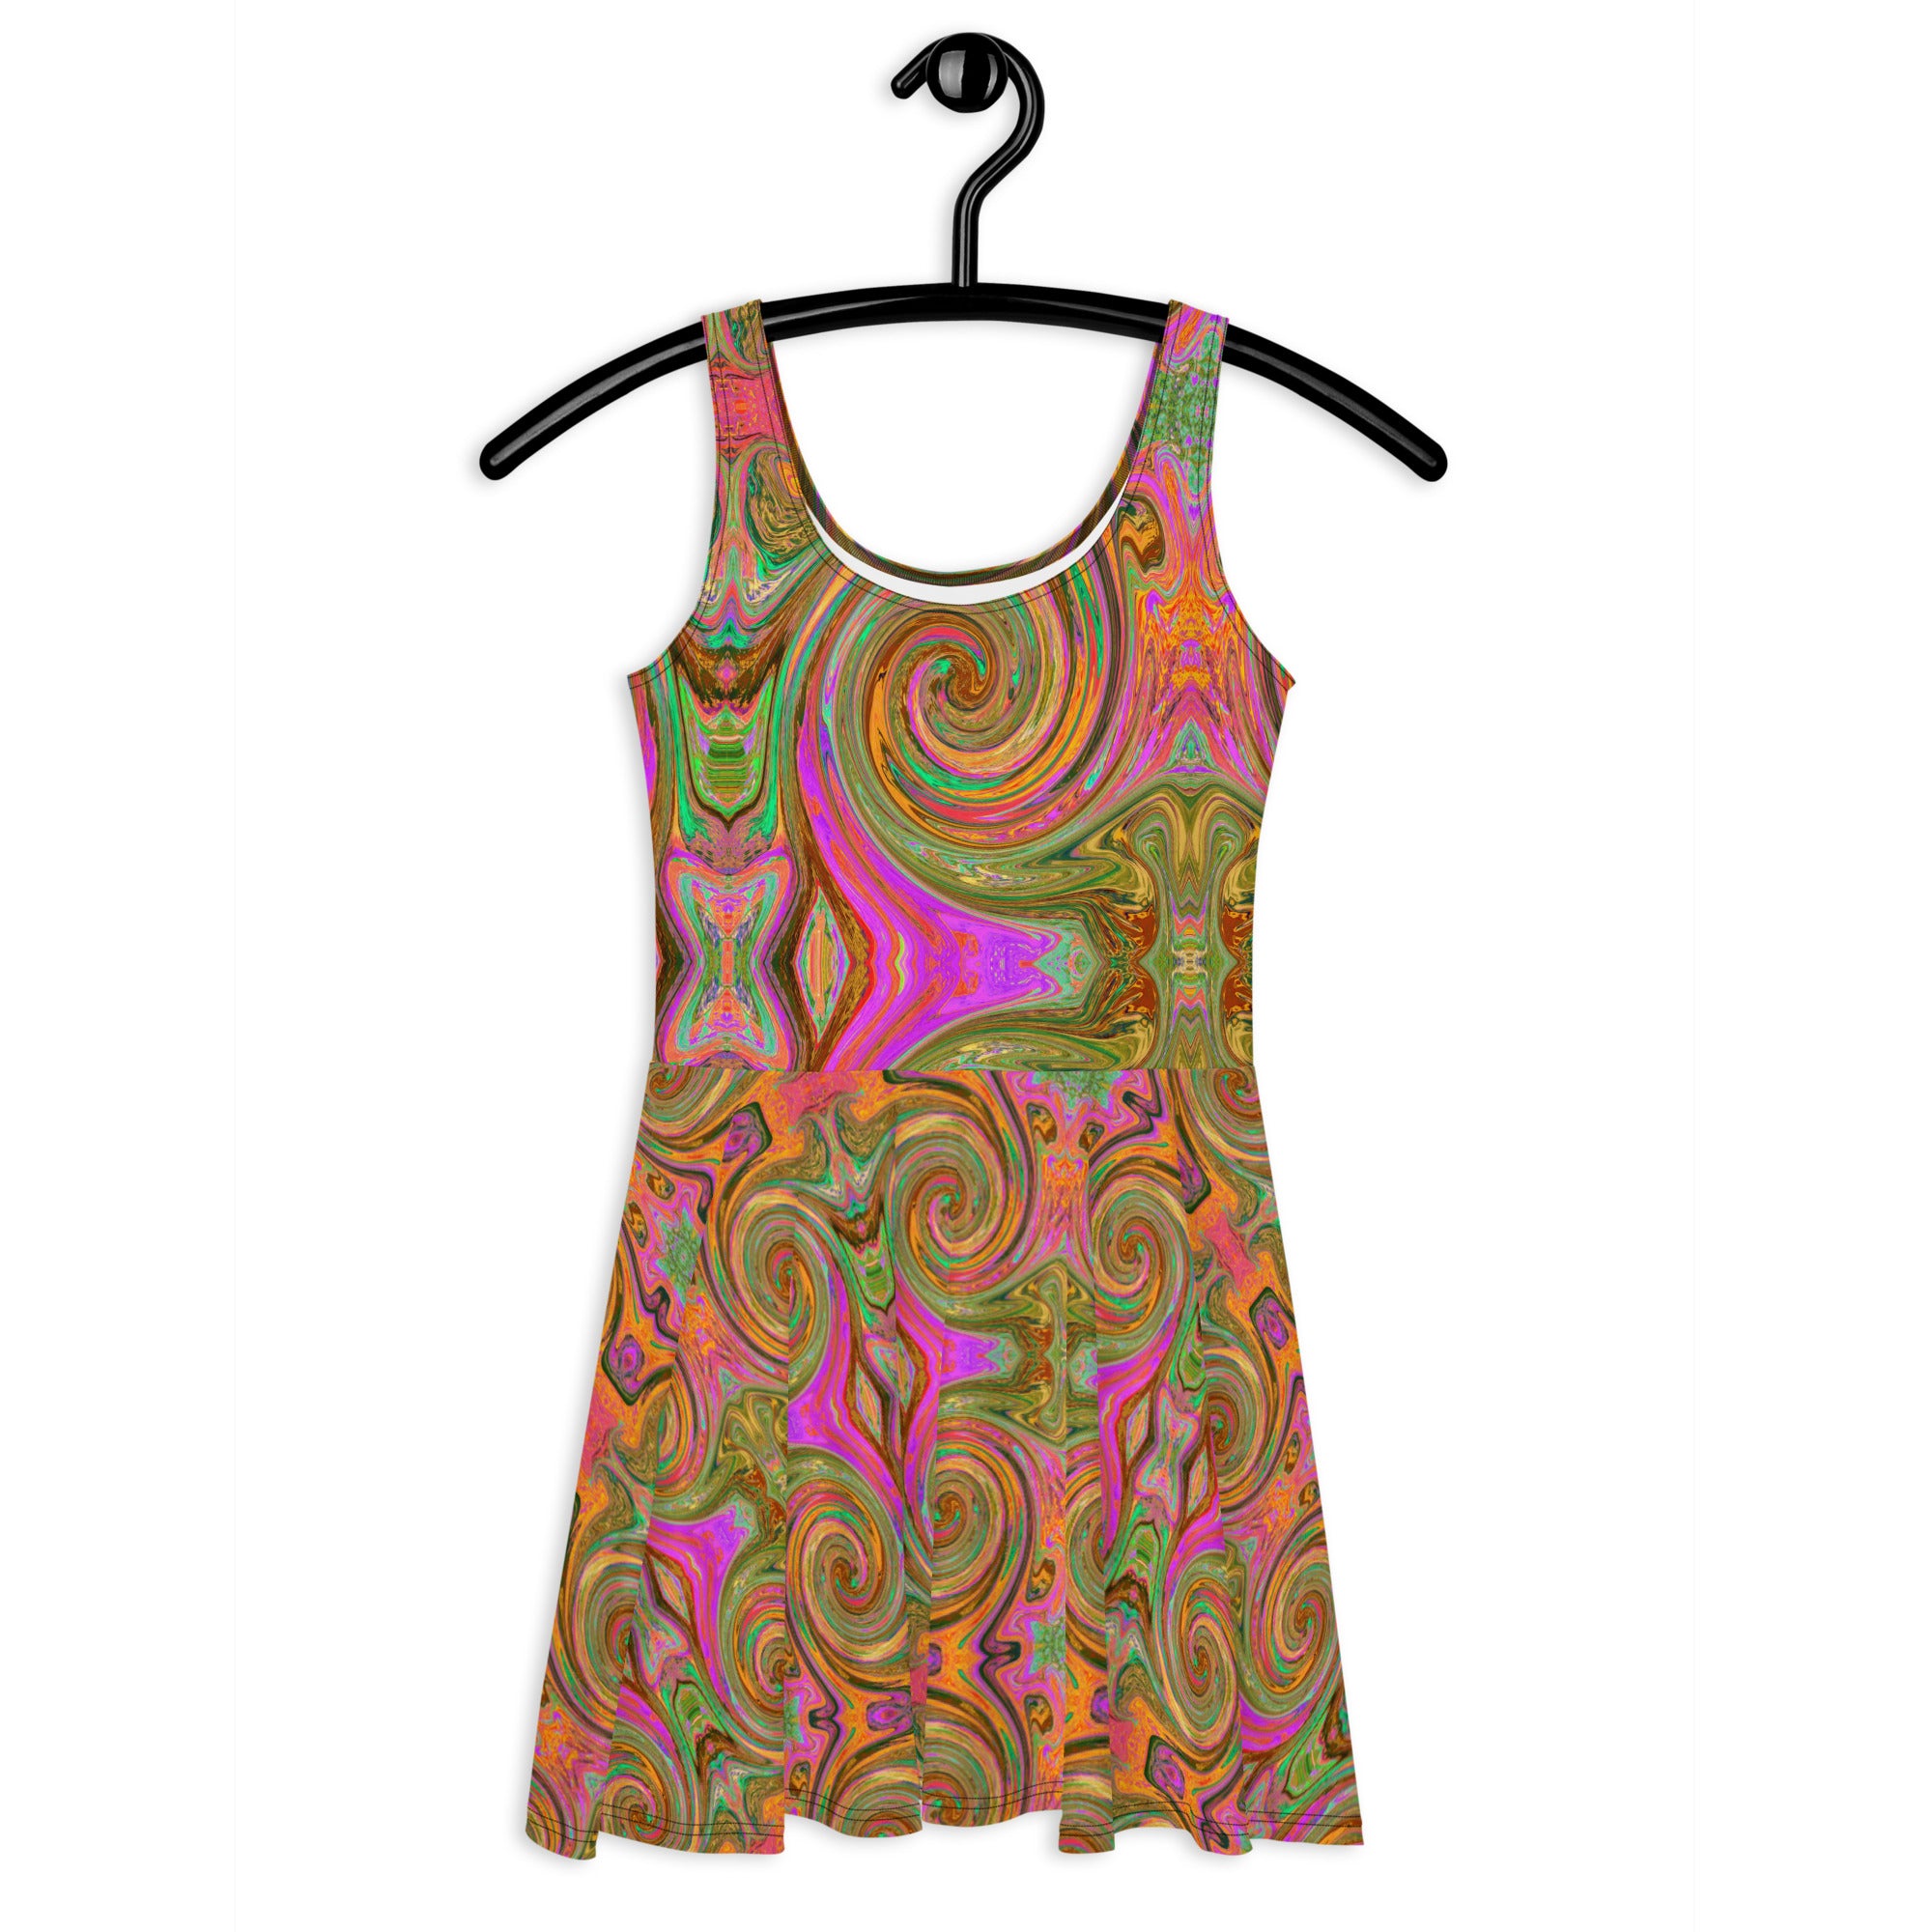 Flared Skater Dress - Groovy Abstract Retro Orange and Green Swirl